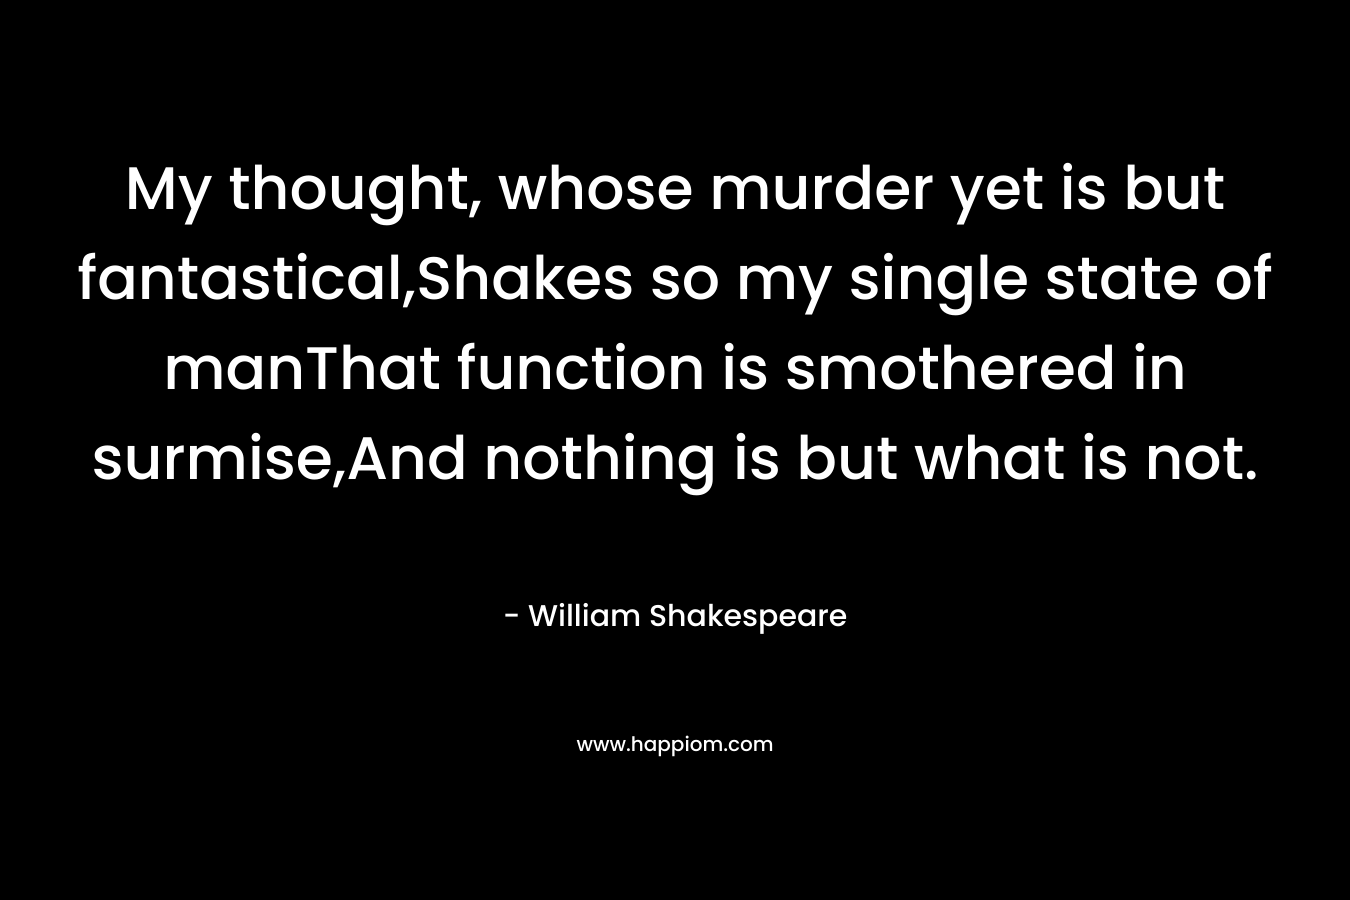 My thought, whose murder yet is but fantastical,Shakes so my single state of manThat function is smothered in surmise,And nothing is but what is not. – William Shakespeare